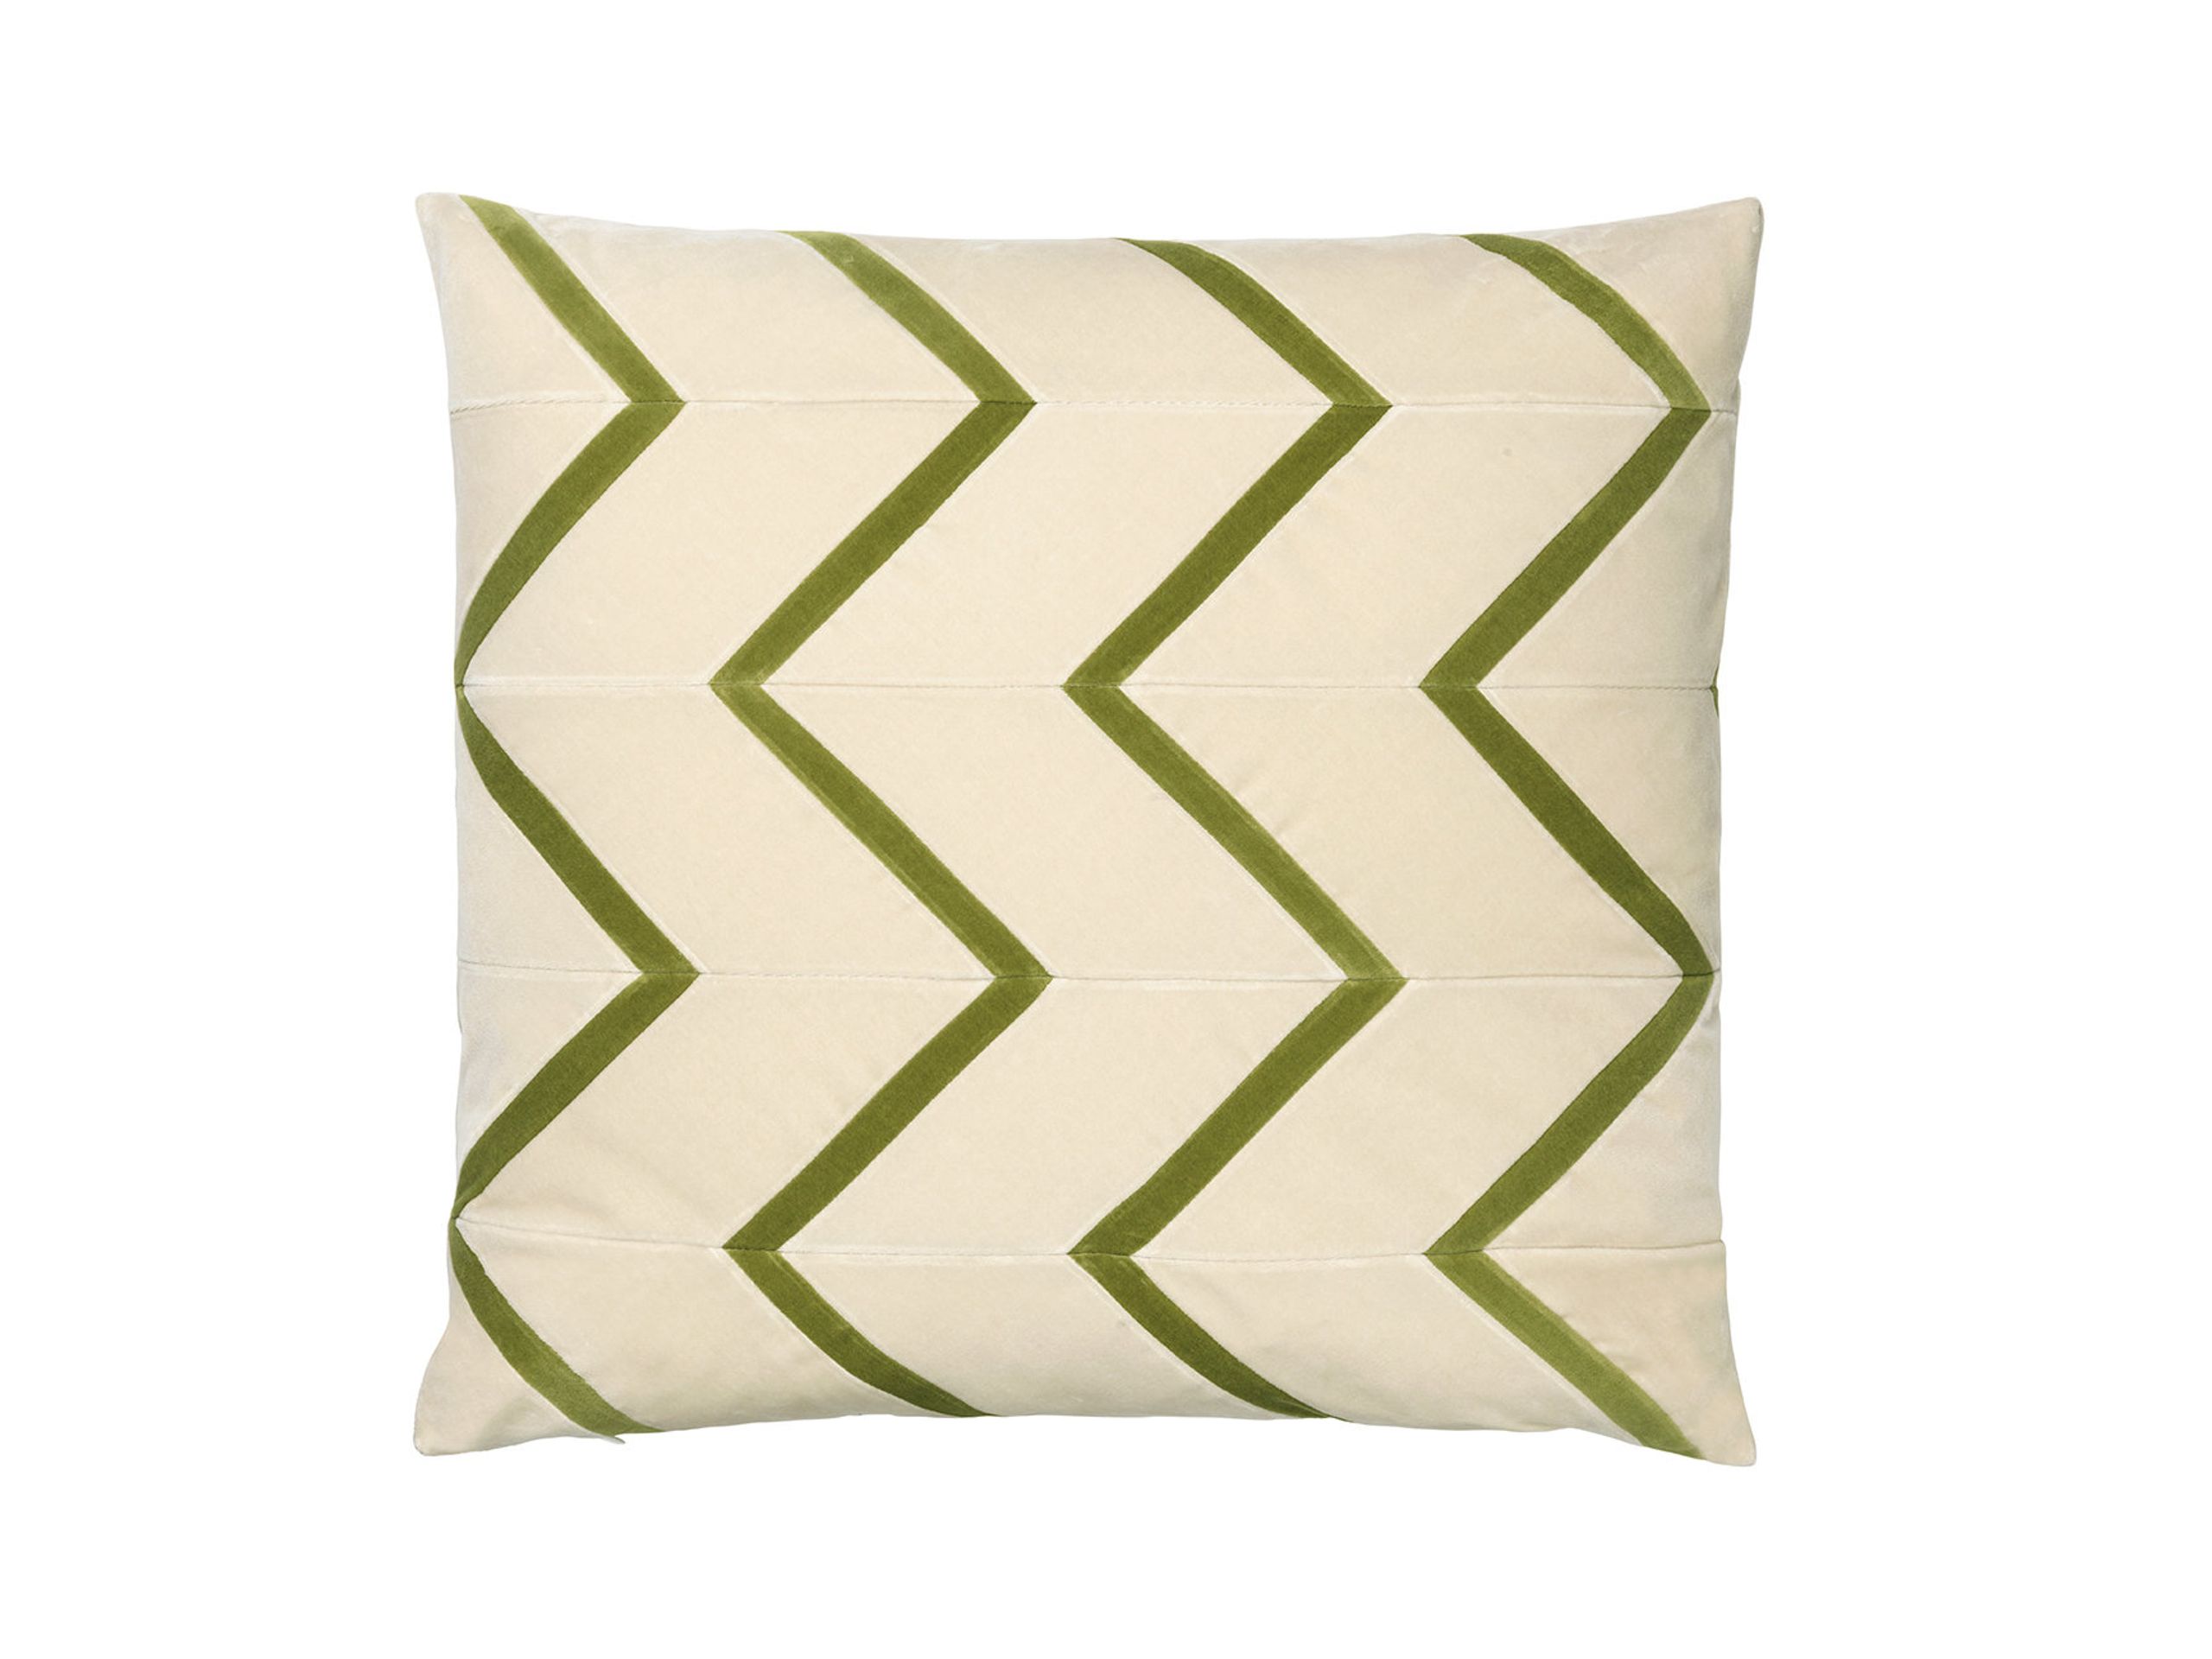 Christina Lundsteen - Coussin - Sadie Pillow - Dusty White / Leaves